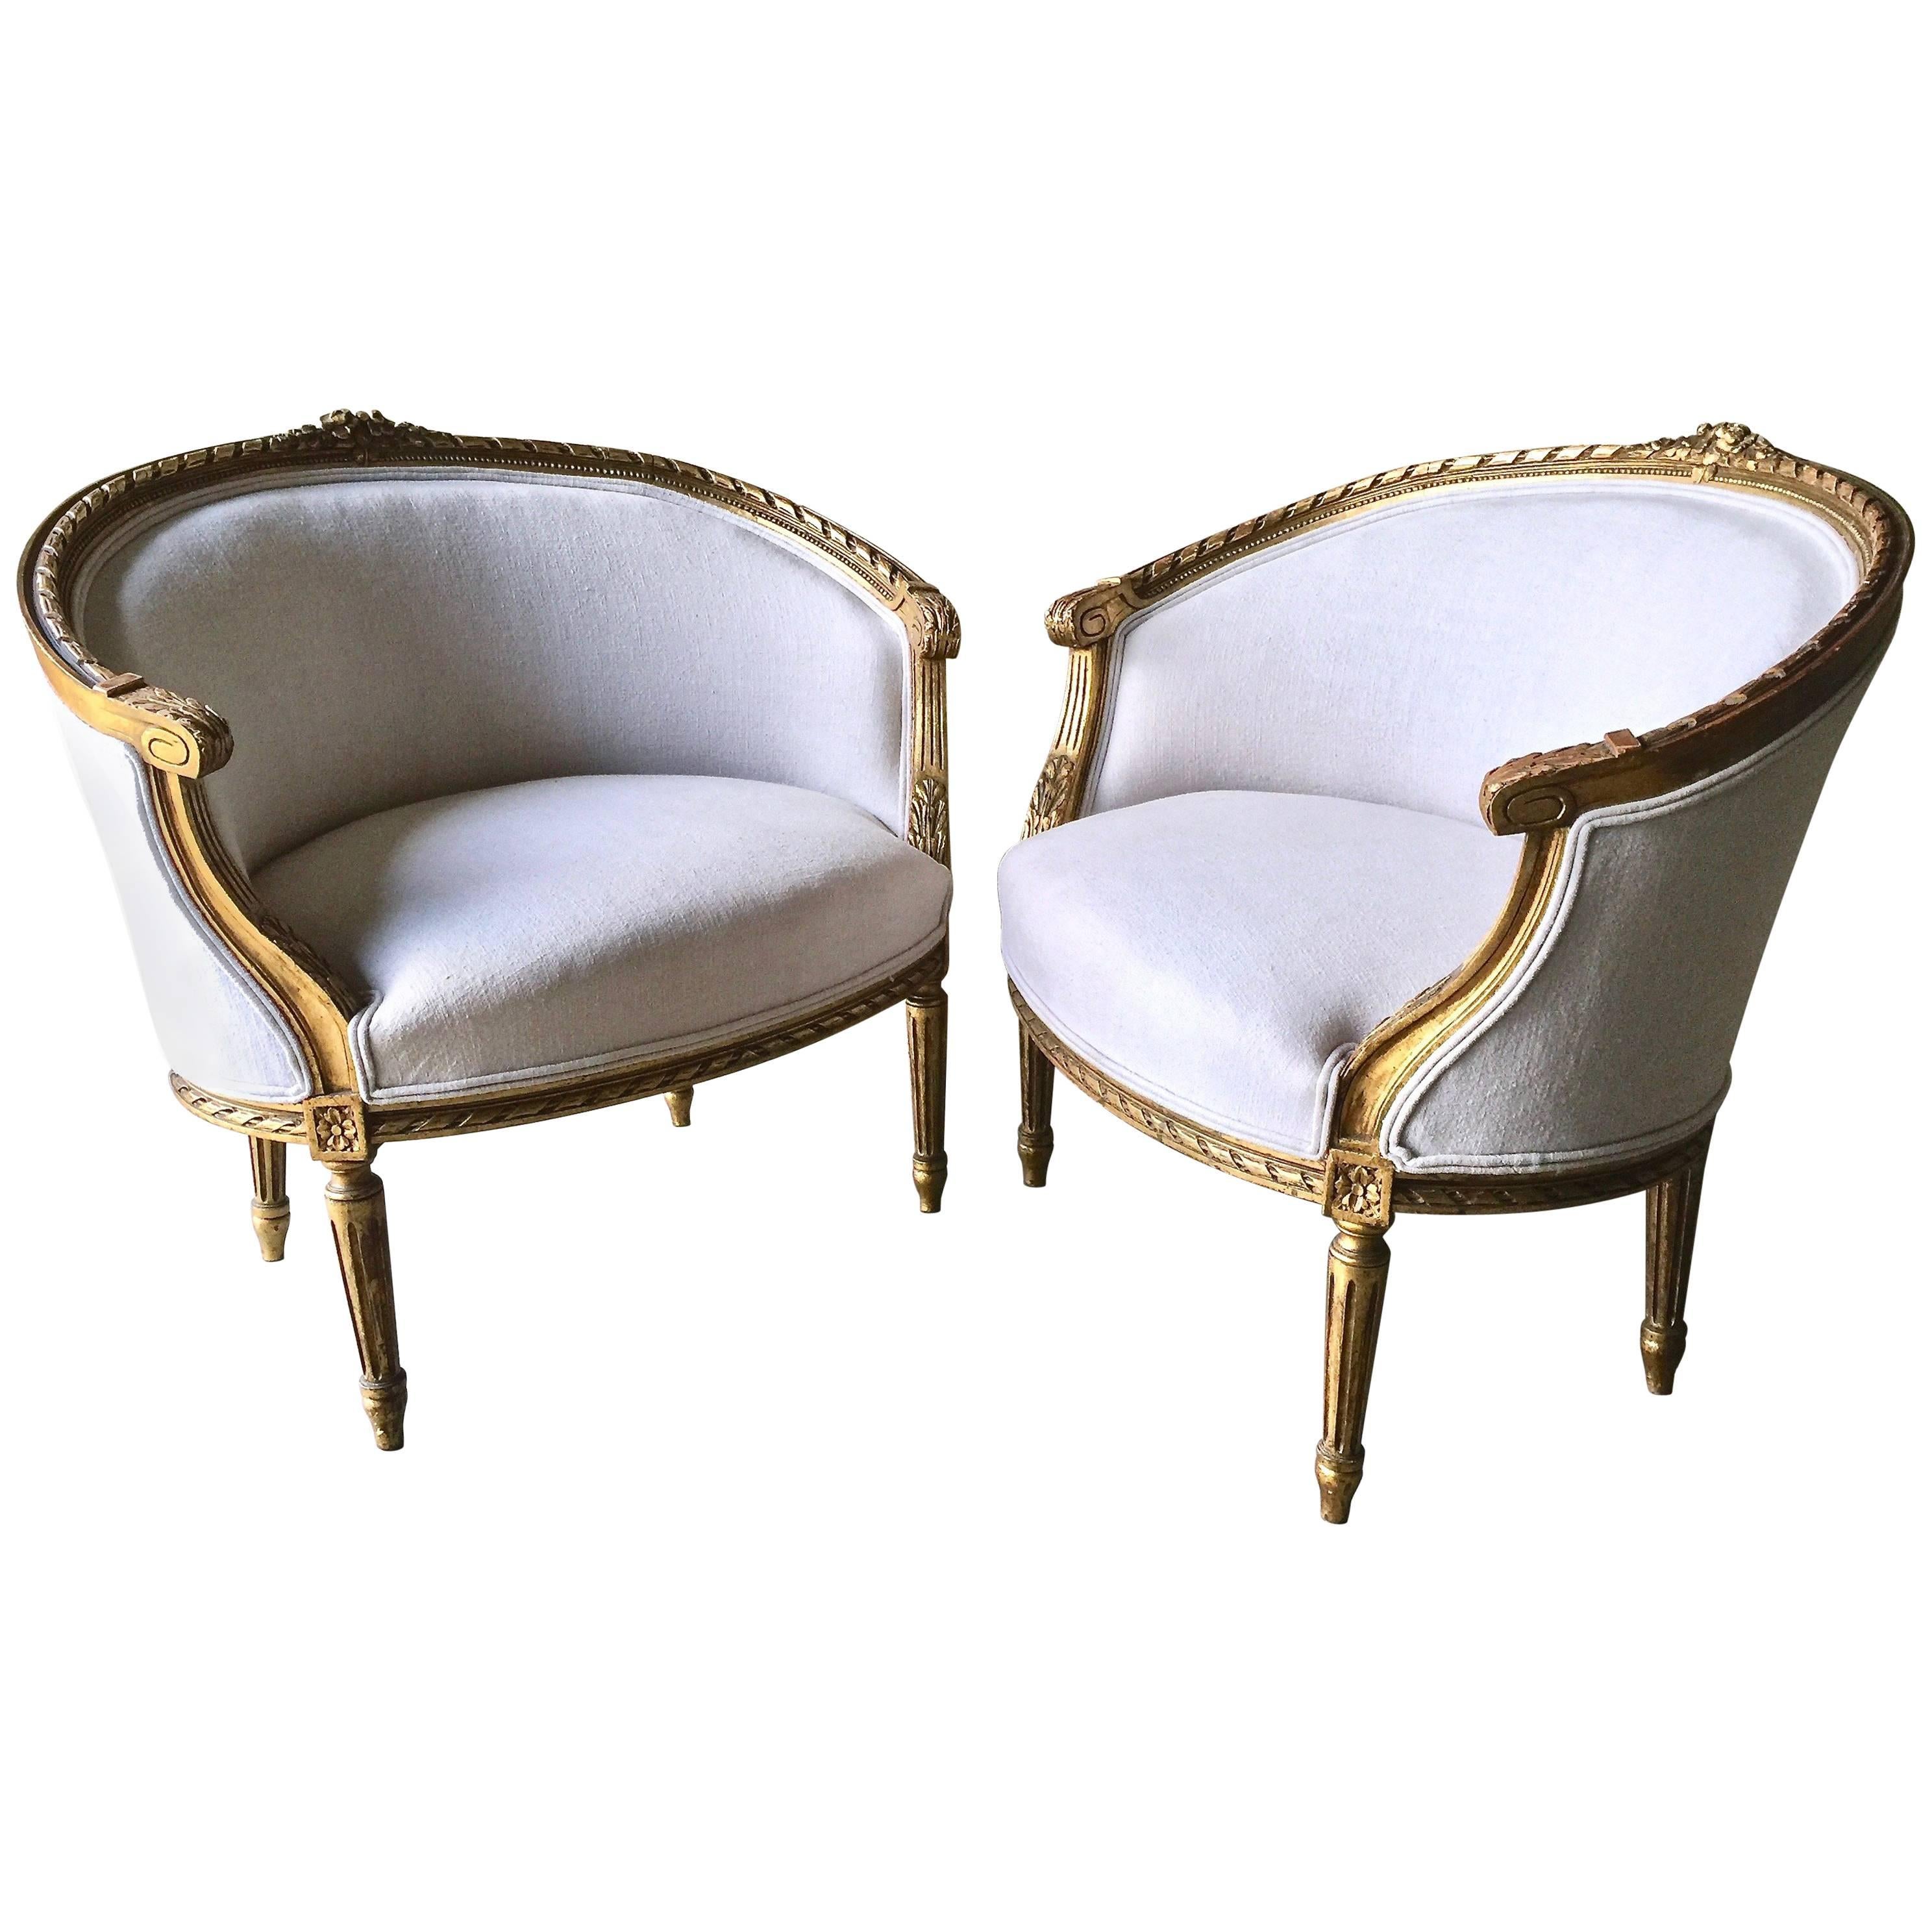 Pair of 19th Century French Louis XVI Style Giltwood Bergères